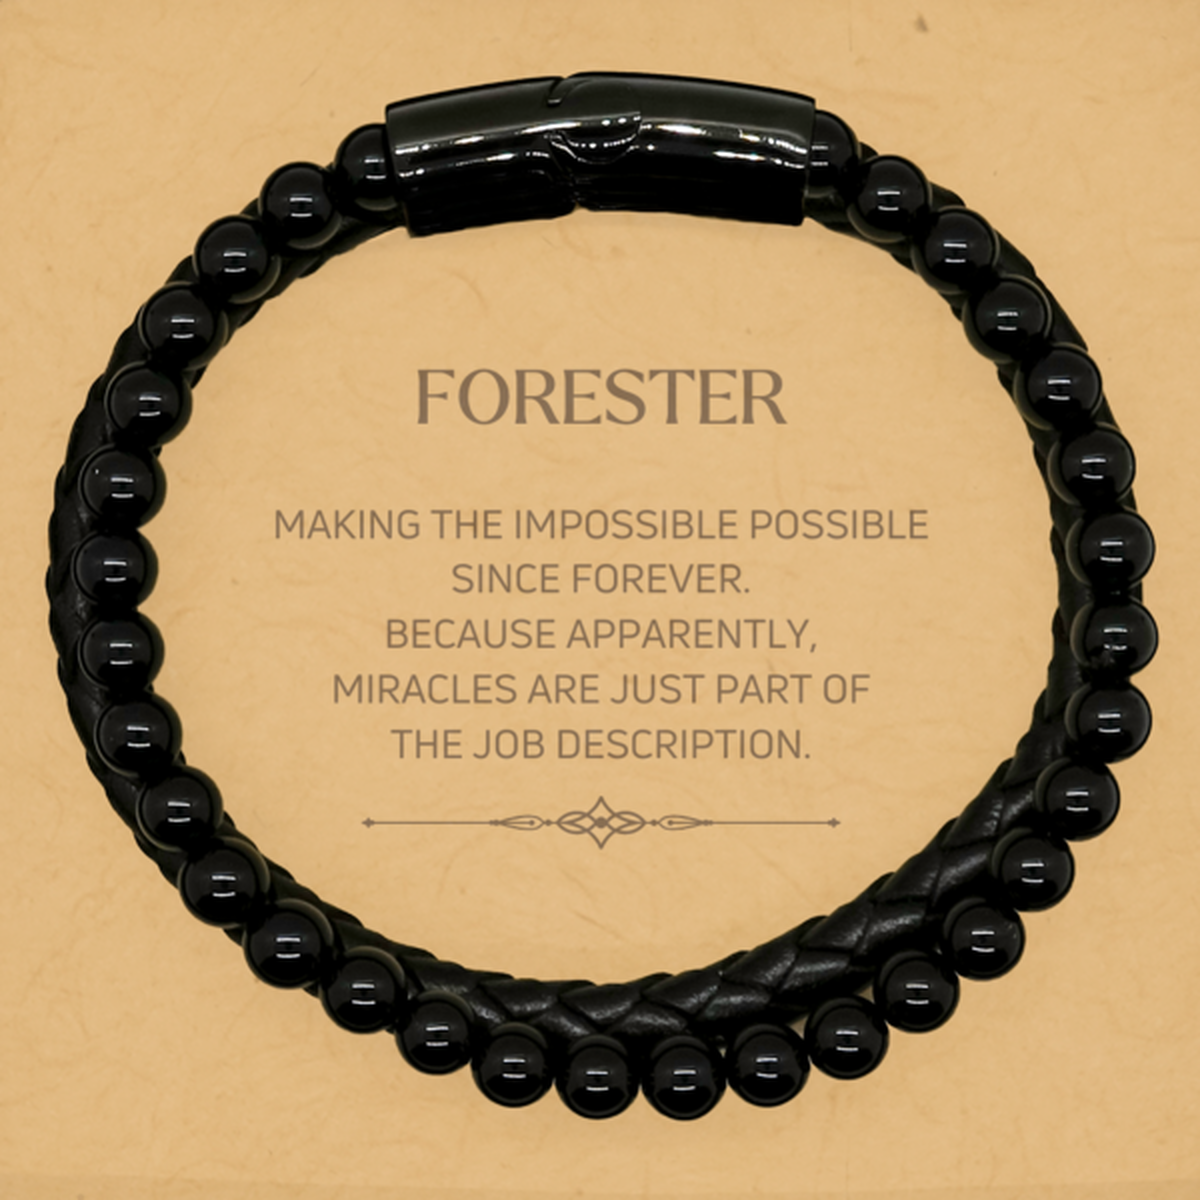 Funny Forester Gifts, Miracles are just part of the job description, Inspirational Birthday Stone Leather Bracelets For Forester, Men, Women, Coworkers, Friends, Boss